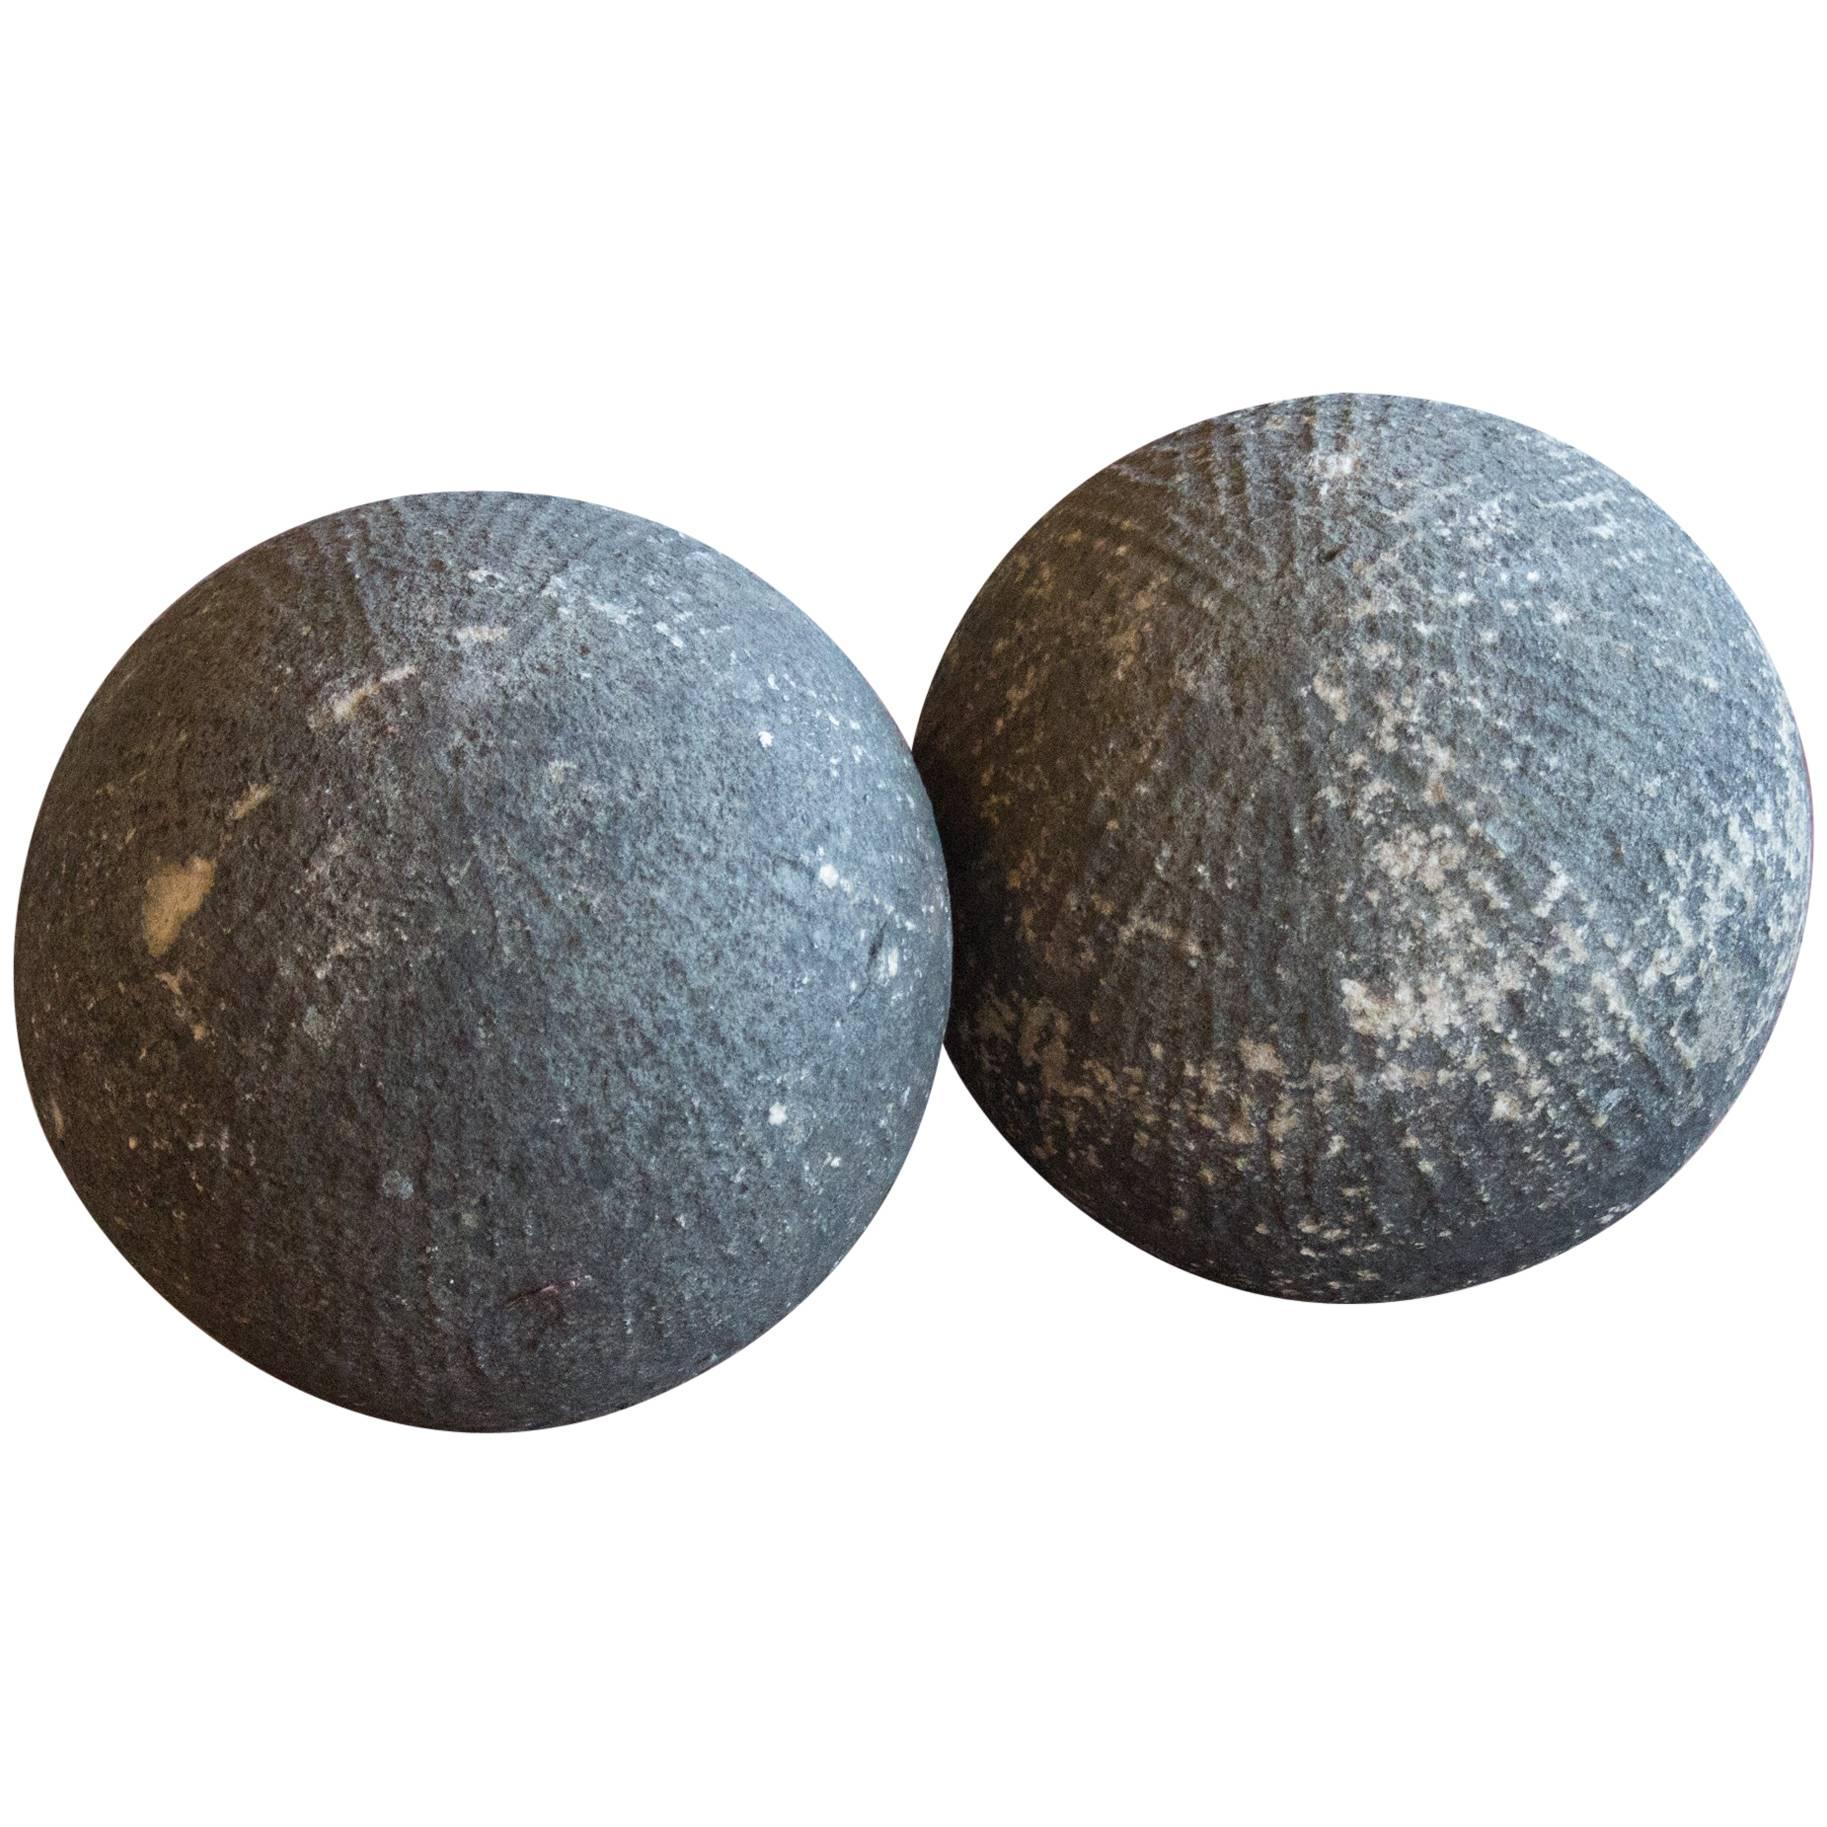 Pair of 19th Century Carved Stone English Balls